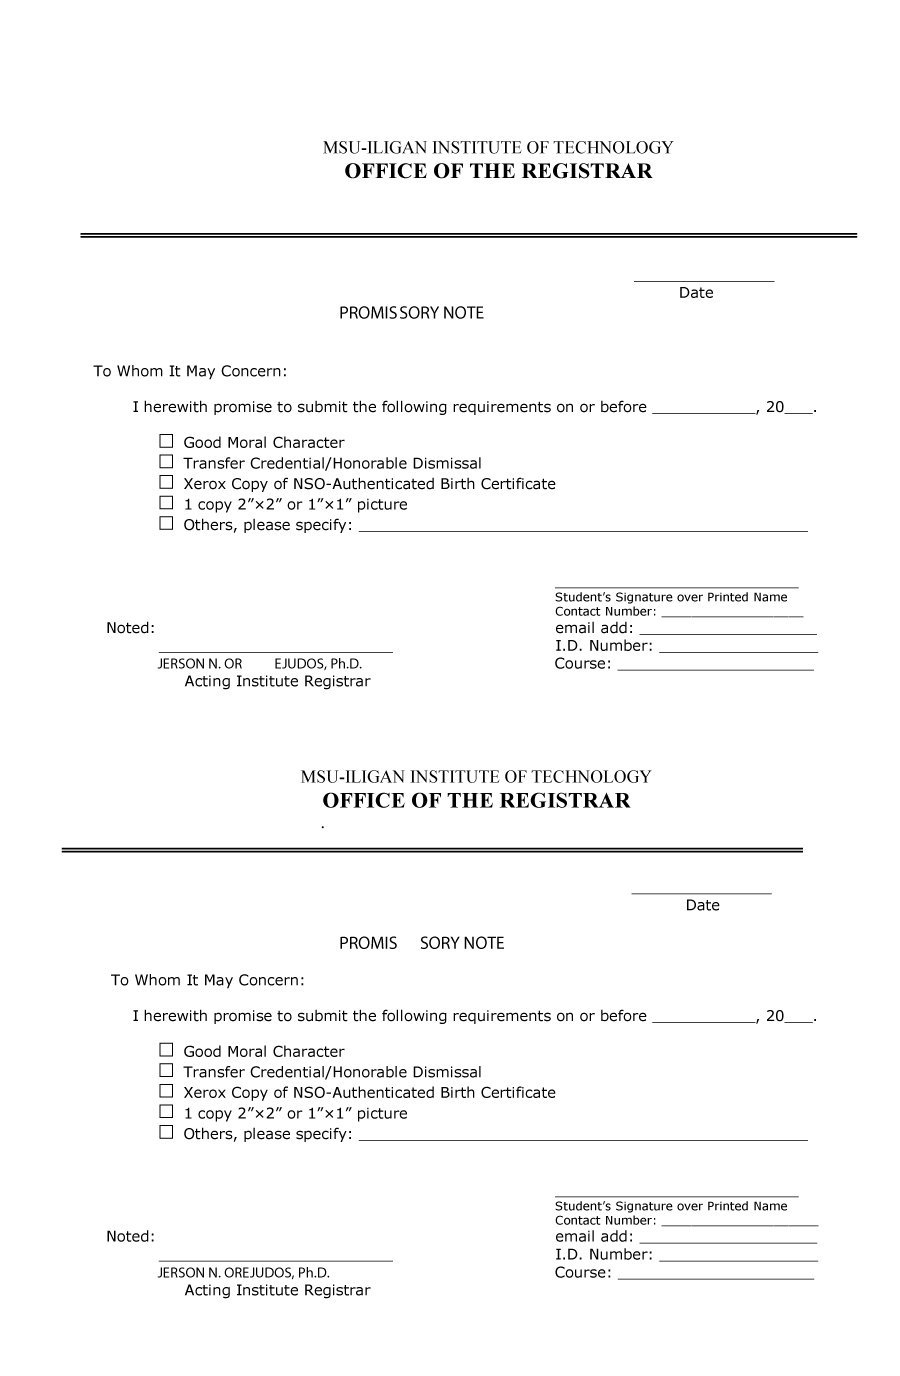 45 Free Promissory Note Templates &amp;amp; Forms [Word &amp;amp; Pdf] ᐅ Template Lab - Free Printable Promissory Note Template